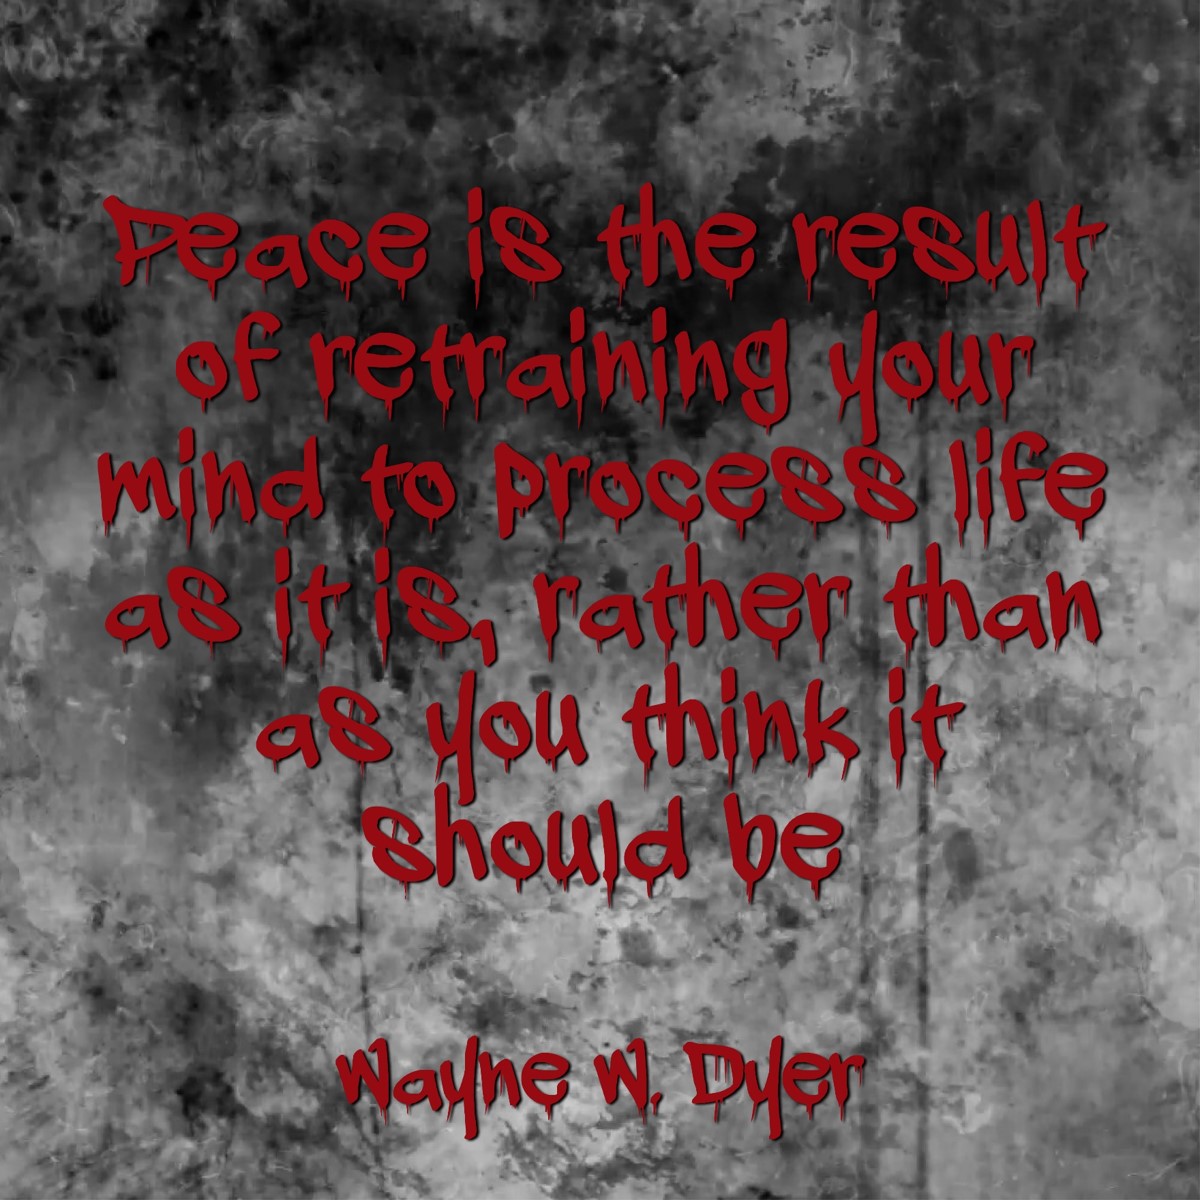 Quote of the Day!

“Peace is the result of retraining your mind to process life as it is, rather than as you think it should be”

-Wayne W. Dyer

Check the first comment to order your book now!

#doppelgangerssecret #fayewestlakenewman #crimefiction #crimeinvestigation